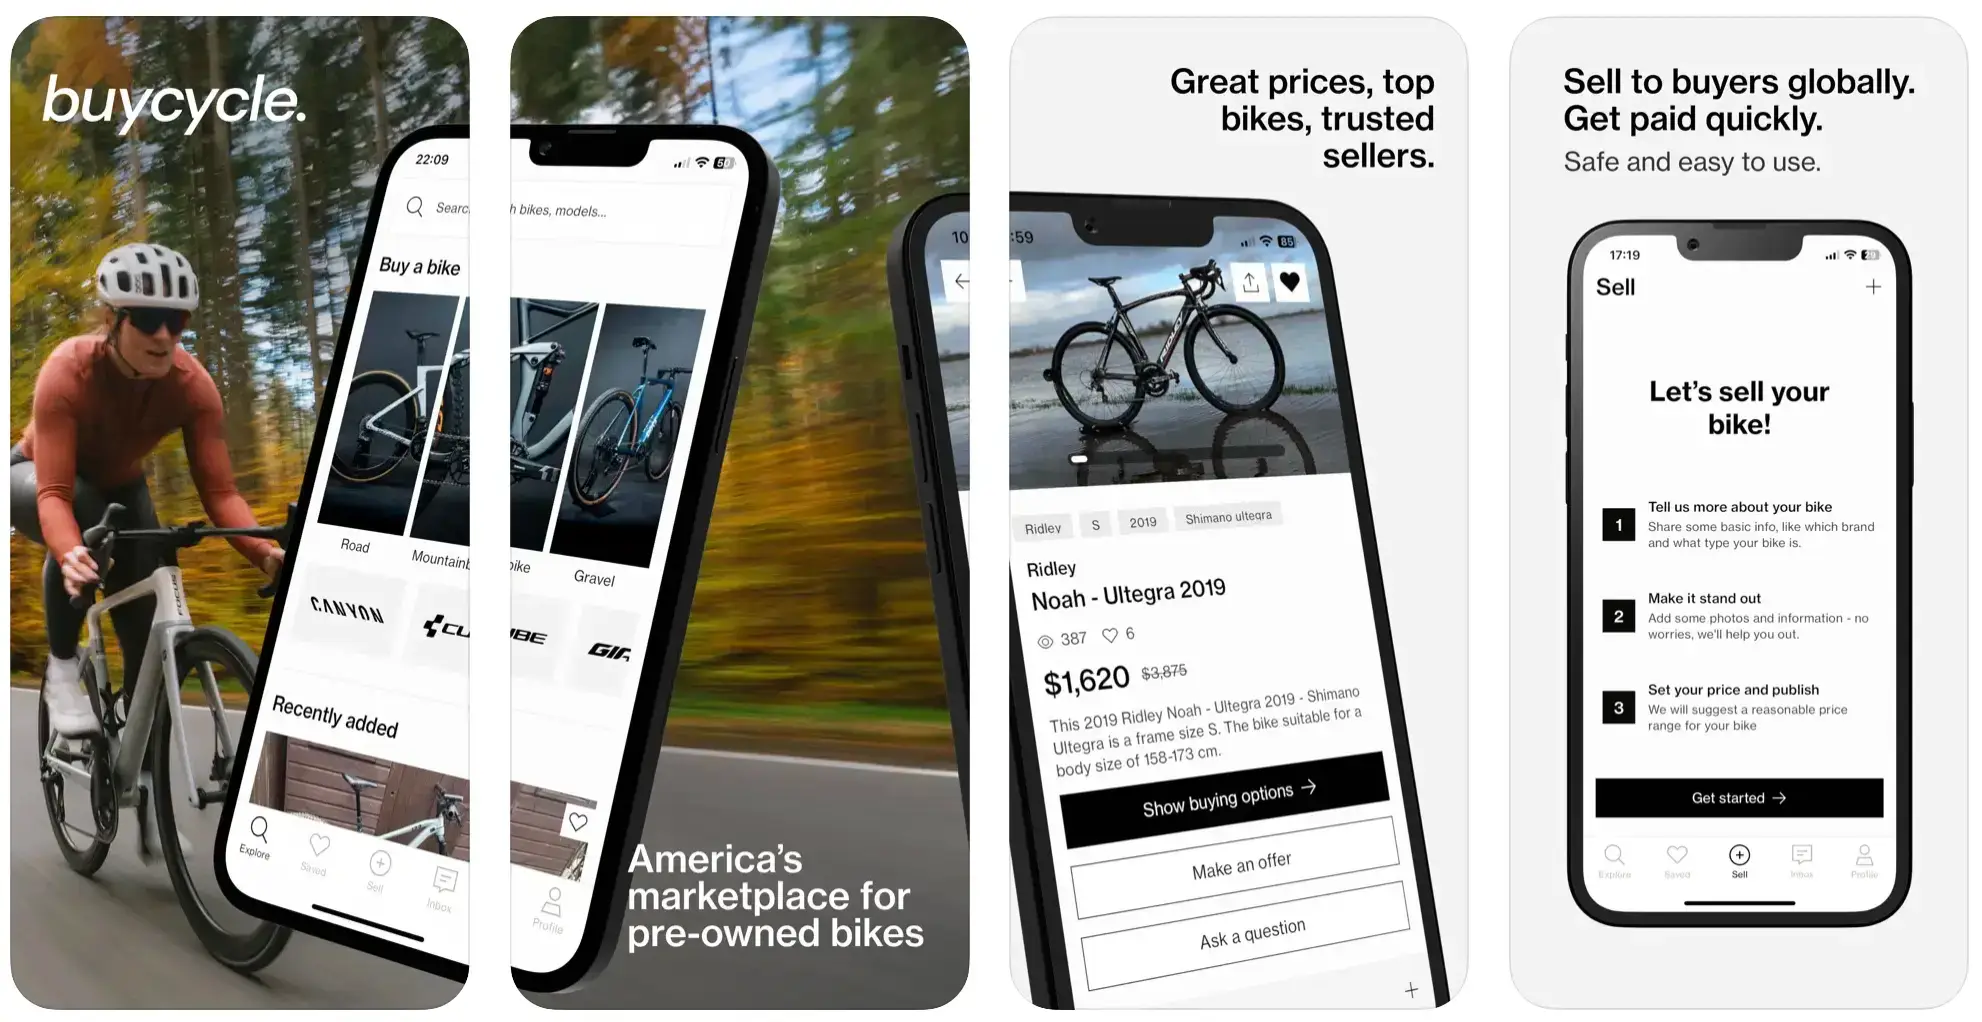 The buycycle mobile app